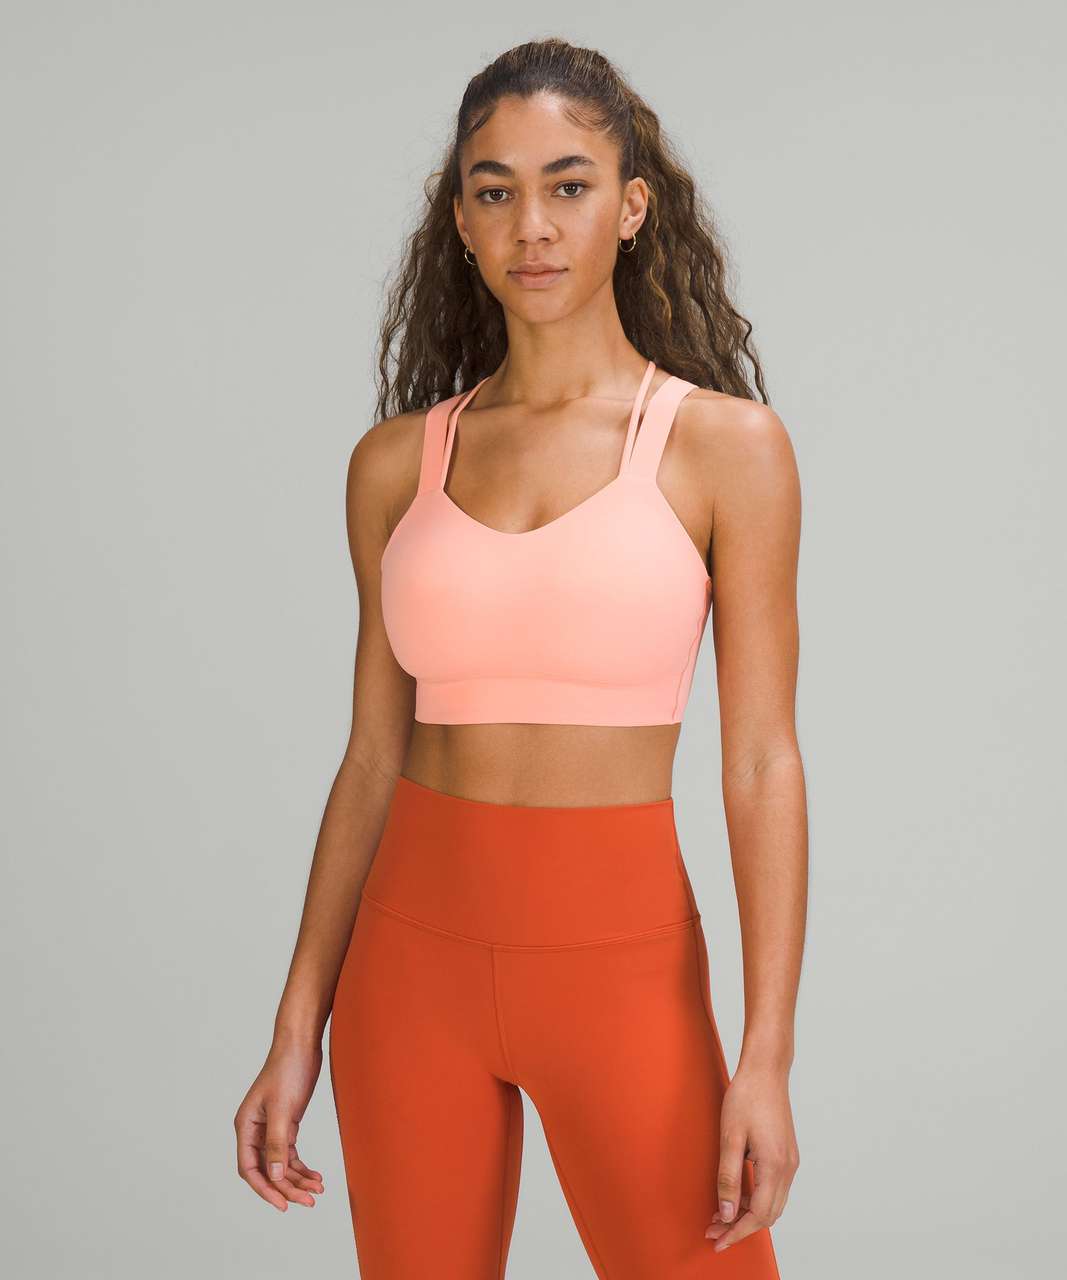 Lululemon Bright Peach Sports Bra- Size 6 – The Saved Collection